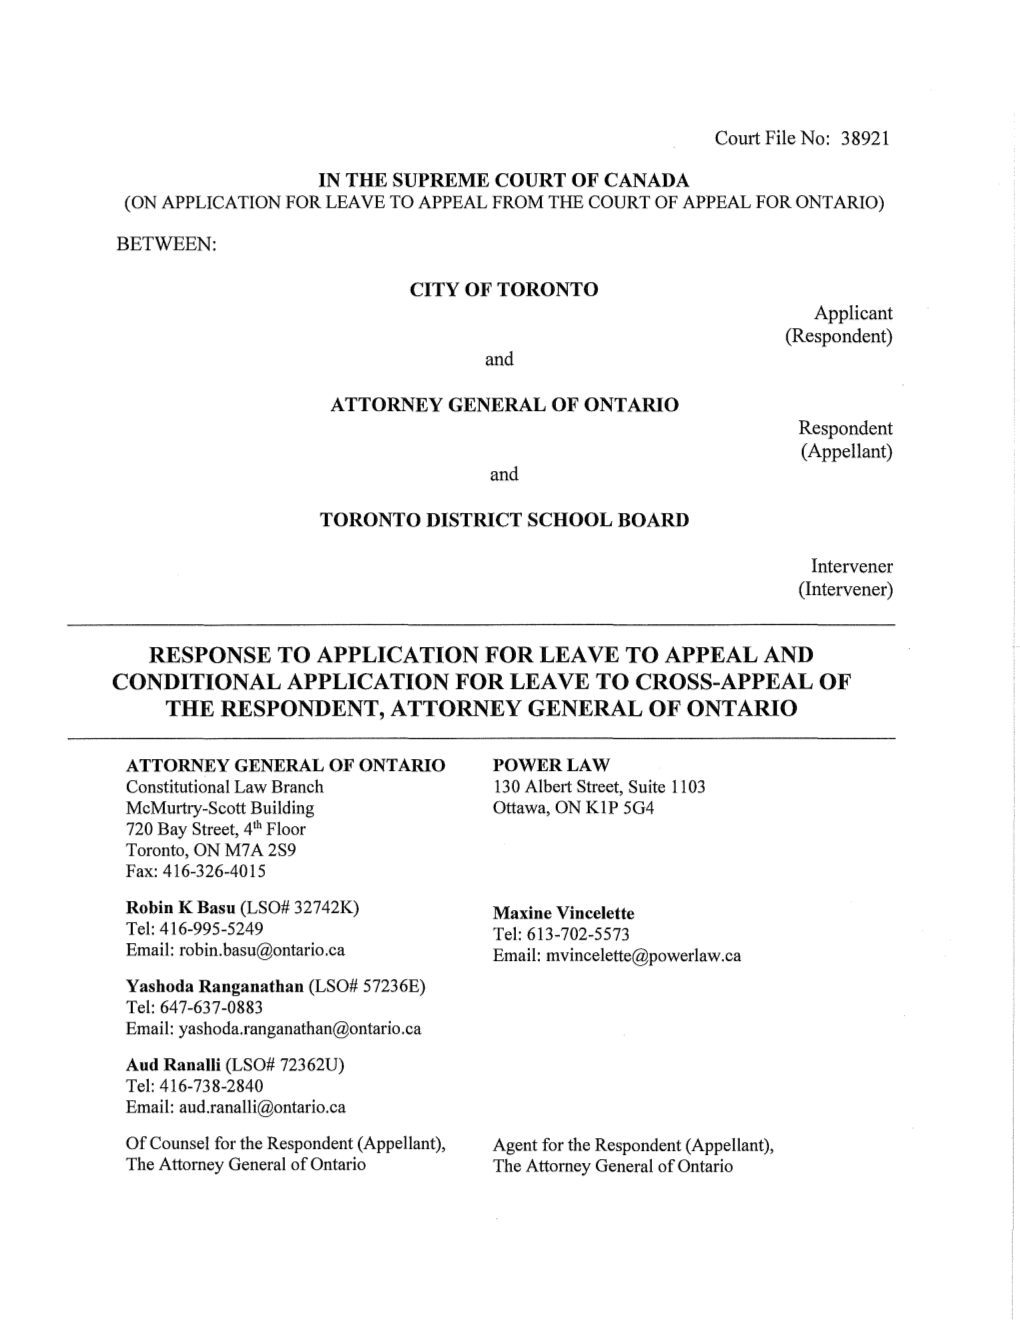 Response to Application for Leave to Appeal and Conditional Application for Leave to Cross-Appeal of the Respondent, Attorney General of Ontario